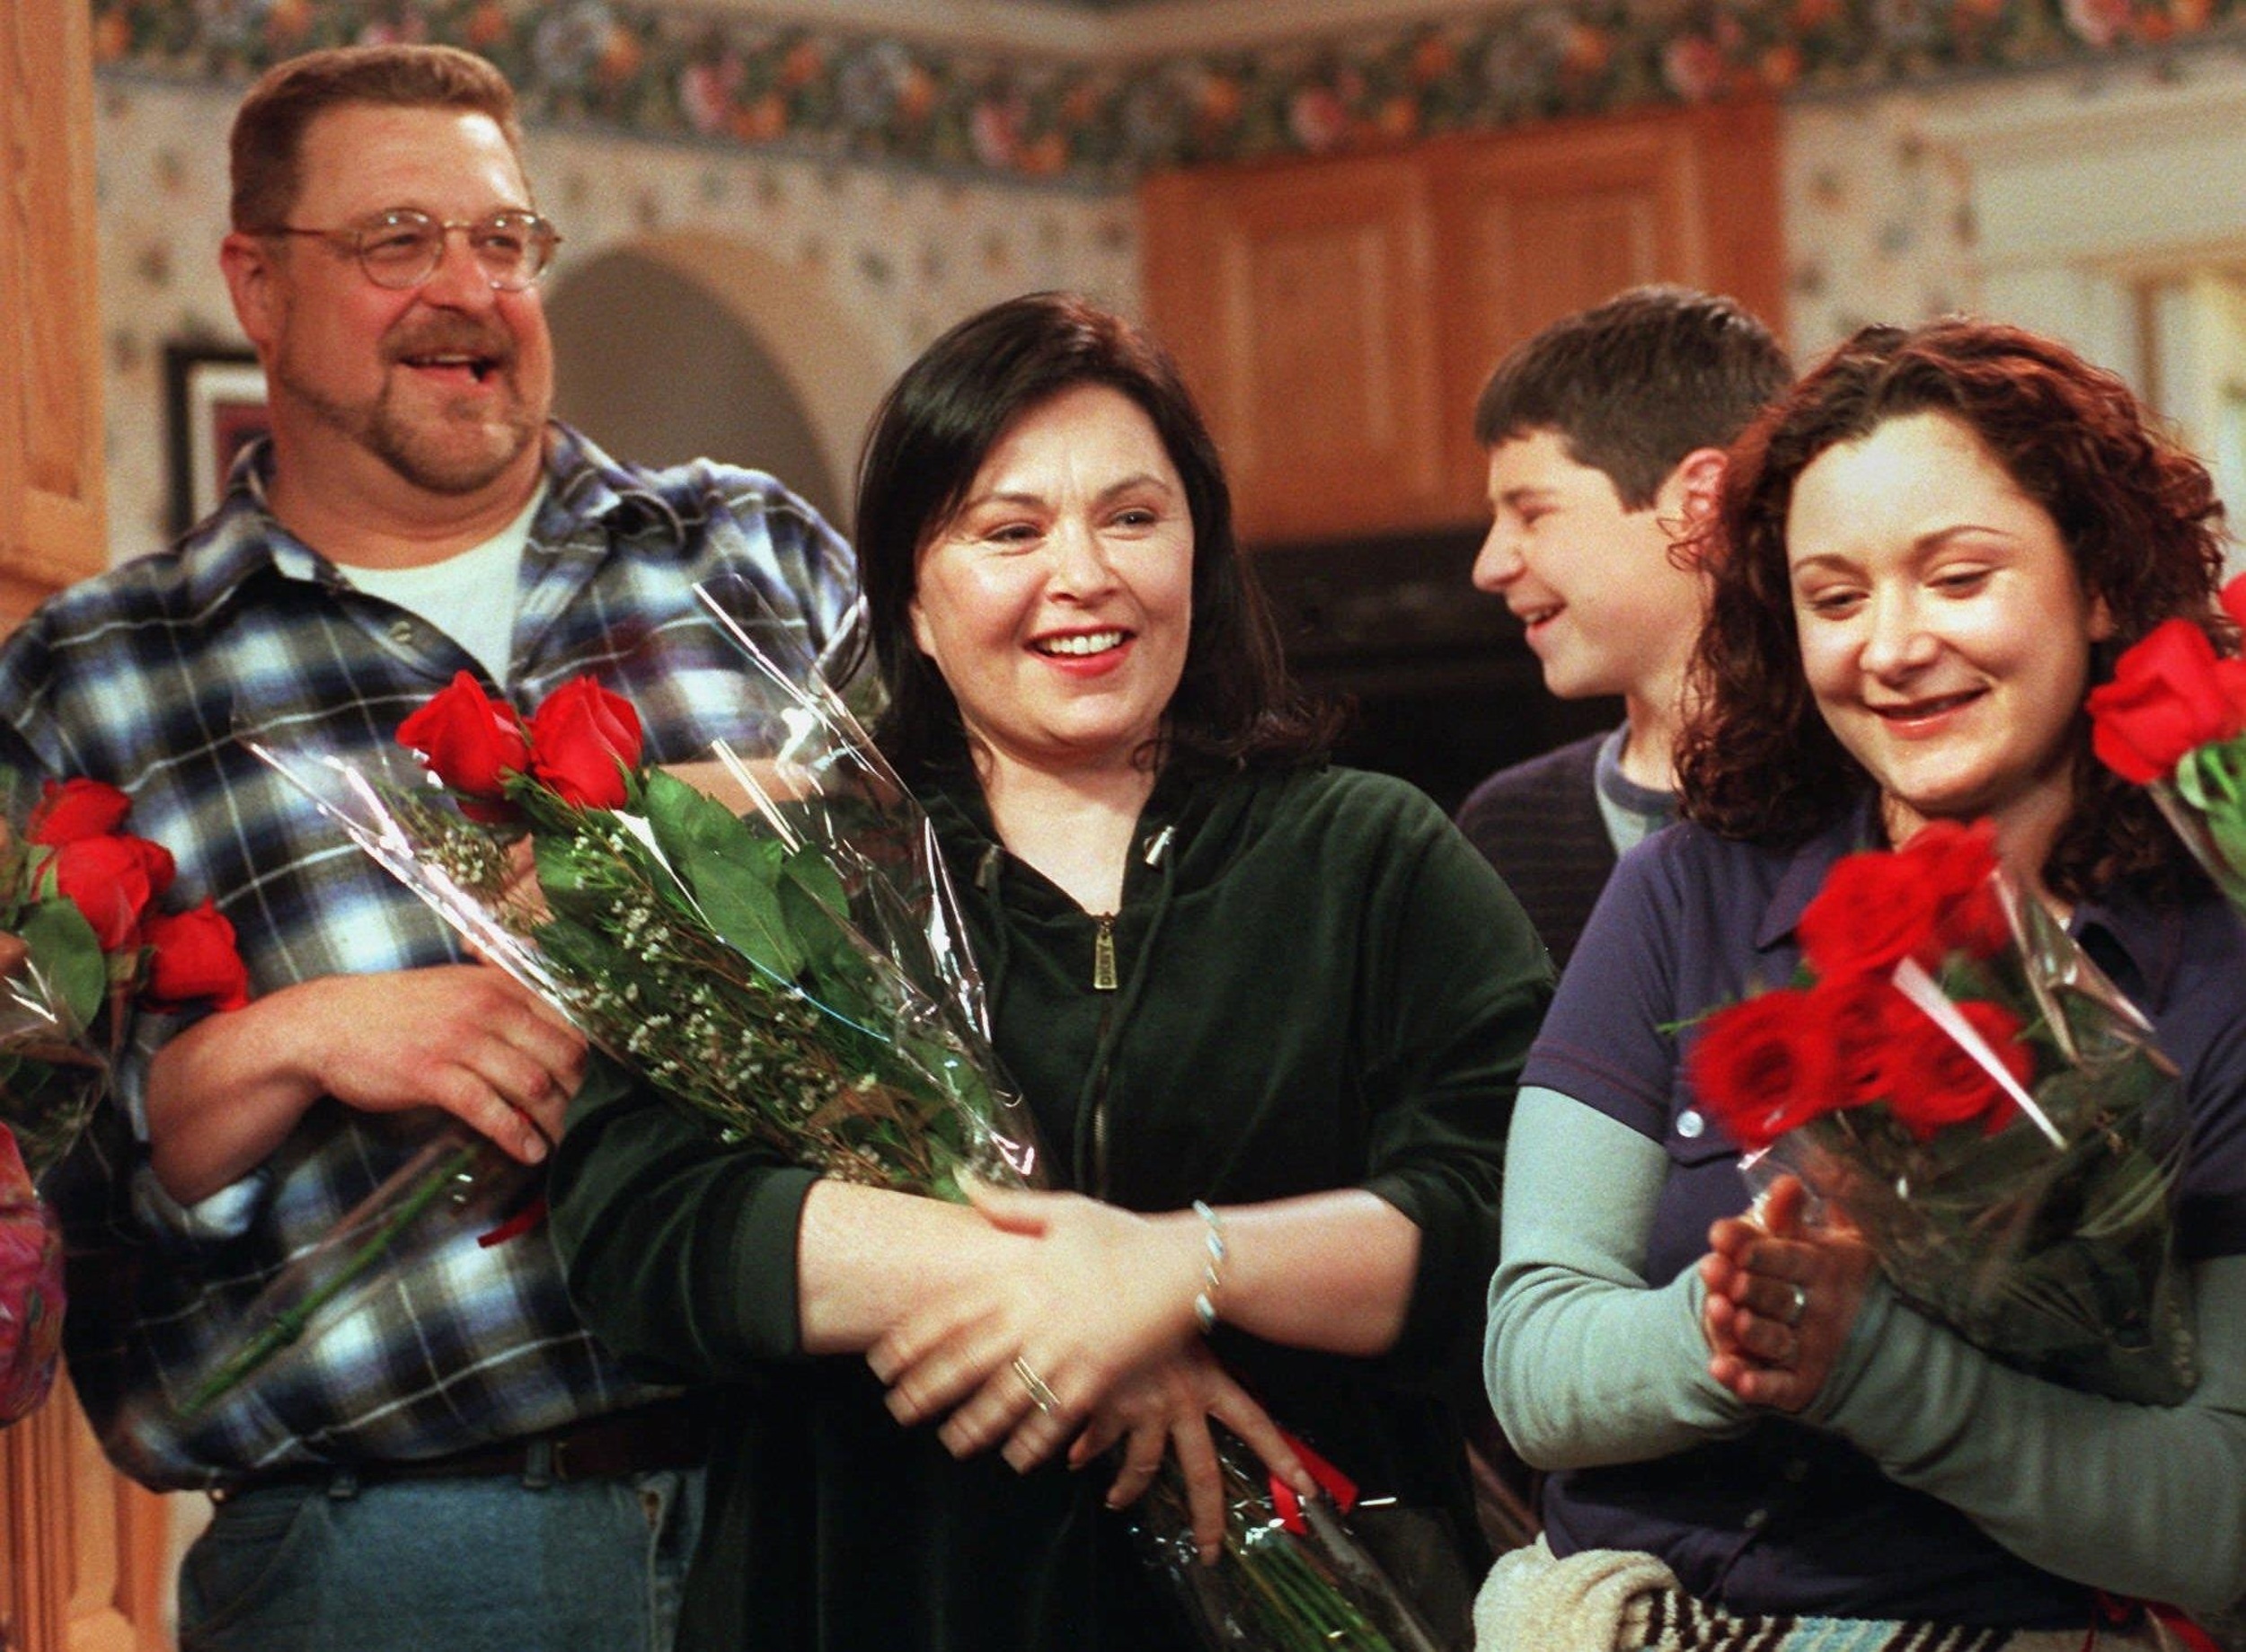 <p>In its prime, <span><em>Roseanne</em> </span>was one of the best sitcoms on television. Unlike many other series, it actually gave working-class families their moment in the sun, showing what it was like for blue-collar folks at the end of the 20th century. In the ninth season, the show jumped the shark in spectacular fashion, as the family wins the lottery and everything goes completely off the rails. Not only that, but it’s then revealed in the finale that the entire season itself was just a dream and that, in fact, Dan had died at the end of the previous season, which adds insult to injury.</p><p><a href='https://www.msn.com/en-us/community/channel/vid-cj9pqbr0vn9in2b6ddcd8sfgpfq6x6utp44fssrv6mc2gtybw0us'>Follow us on MSN to see more of our exclusive entertainment content.</a></p>